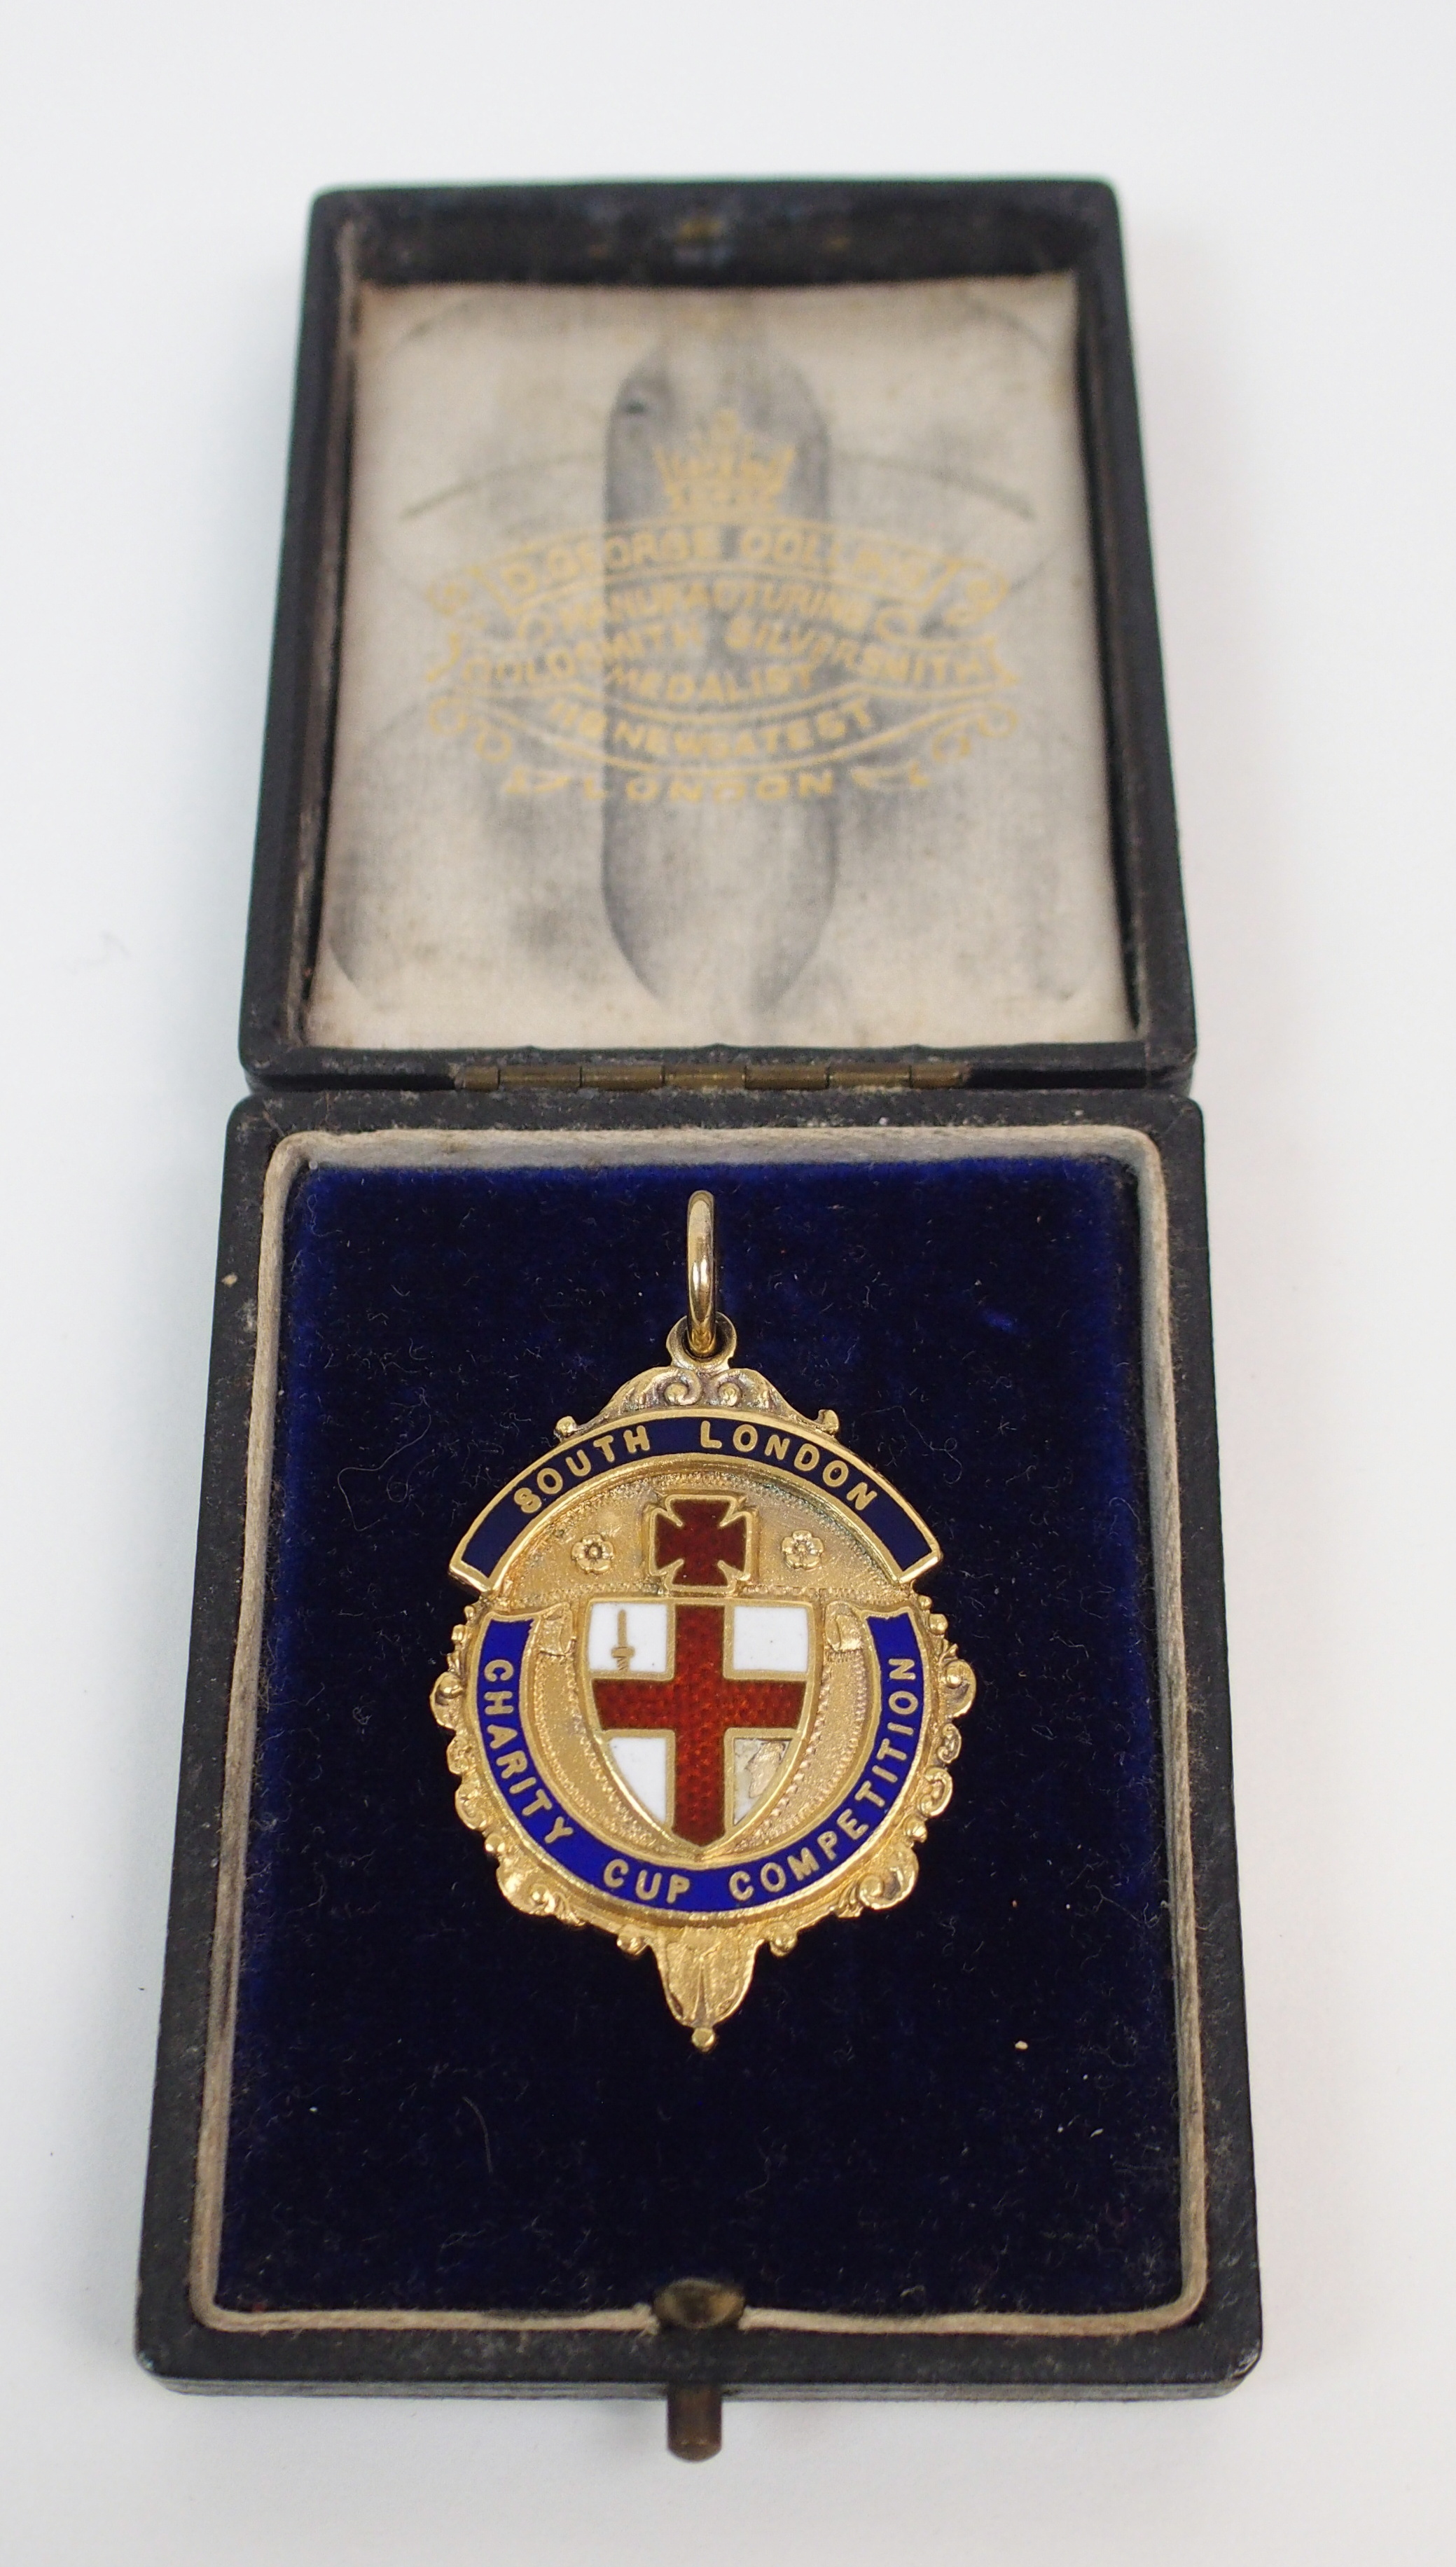 A SILVER-GILT AND ENAMEL SOUTH LONDON FOOTBALL MEDAL the obverse inscribed South London, Charity Cup - Image 2 of 4